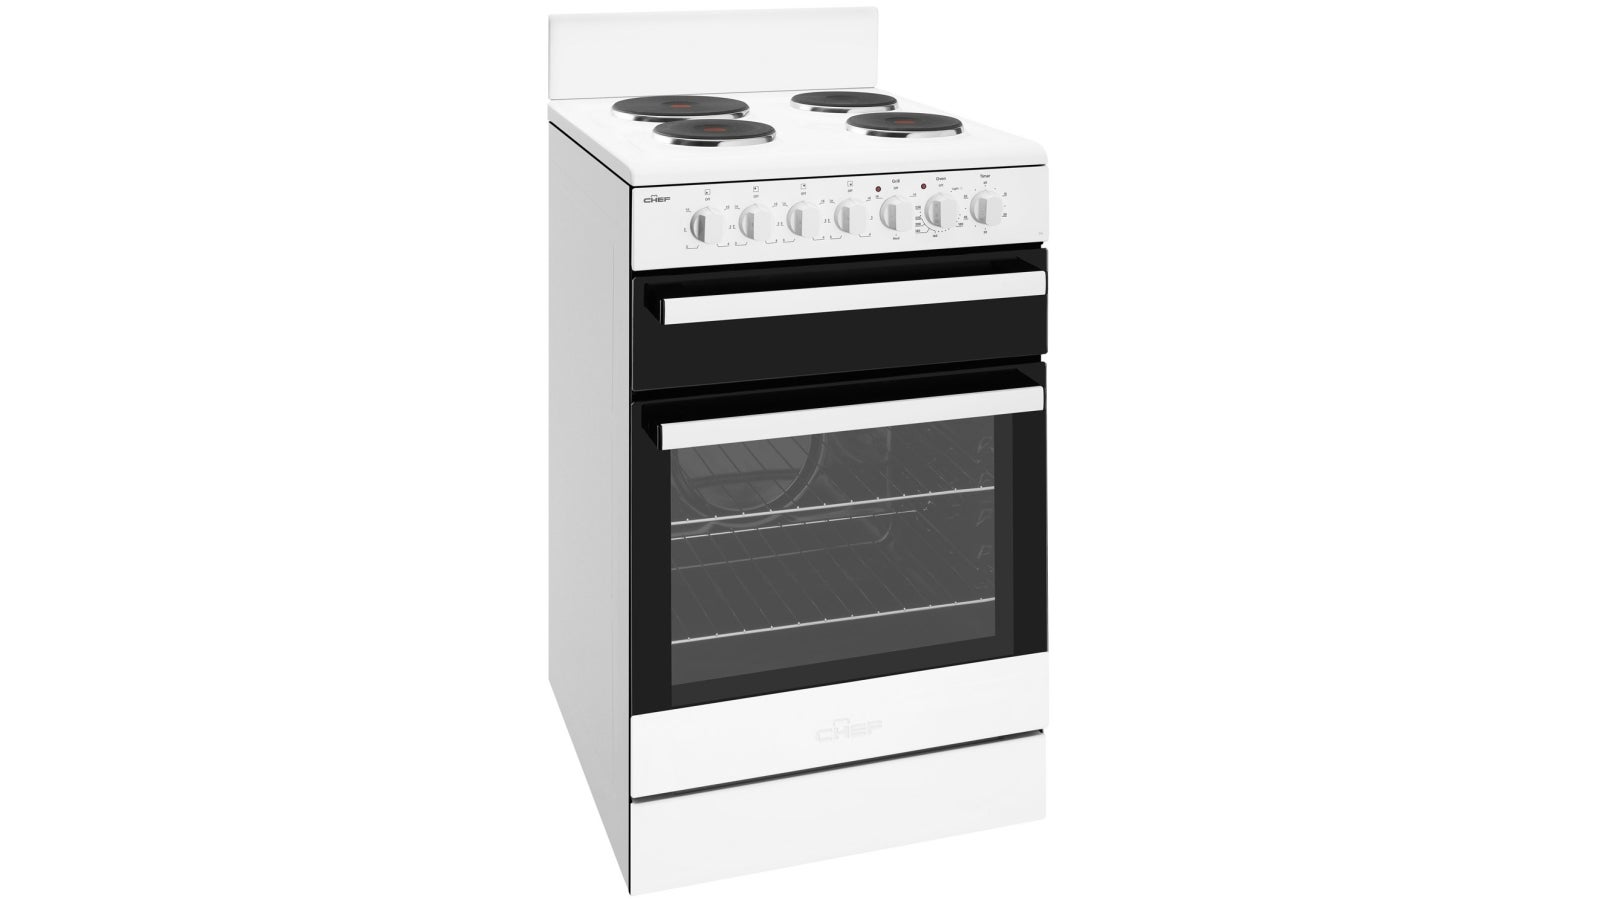 Chef CFE535WB Oven